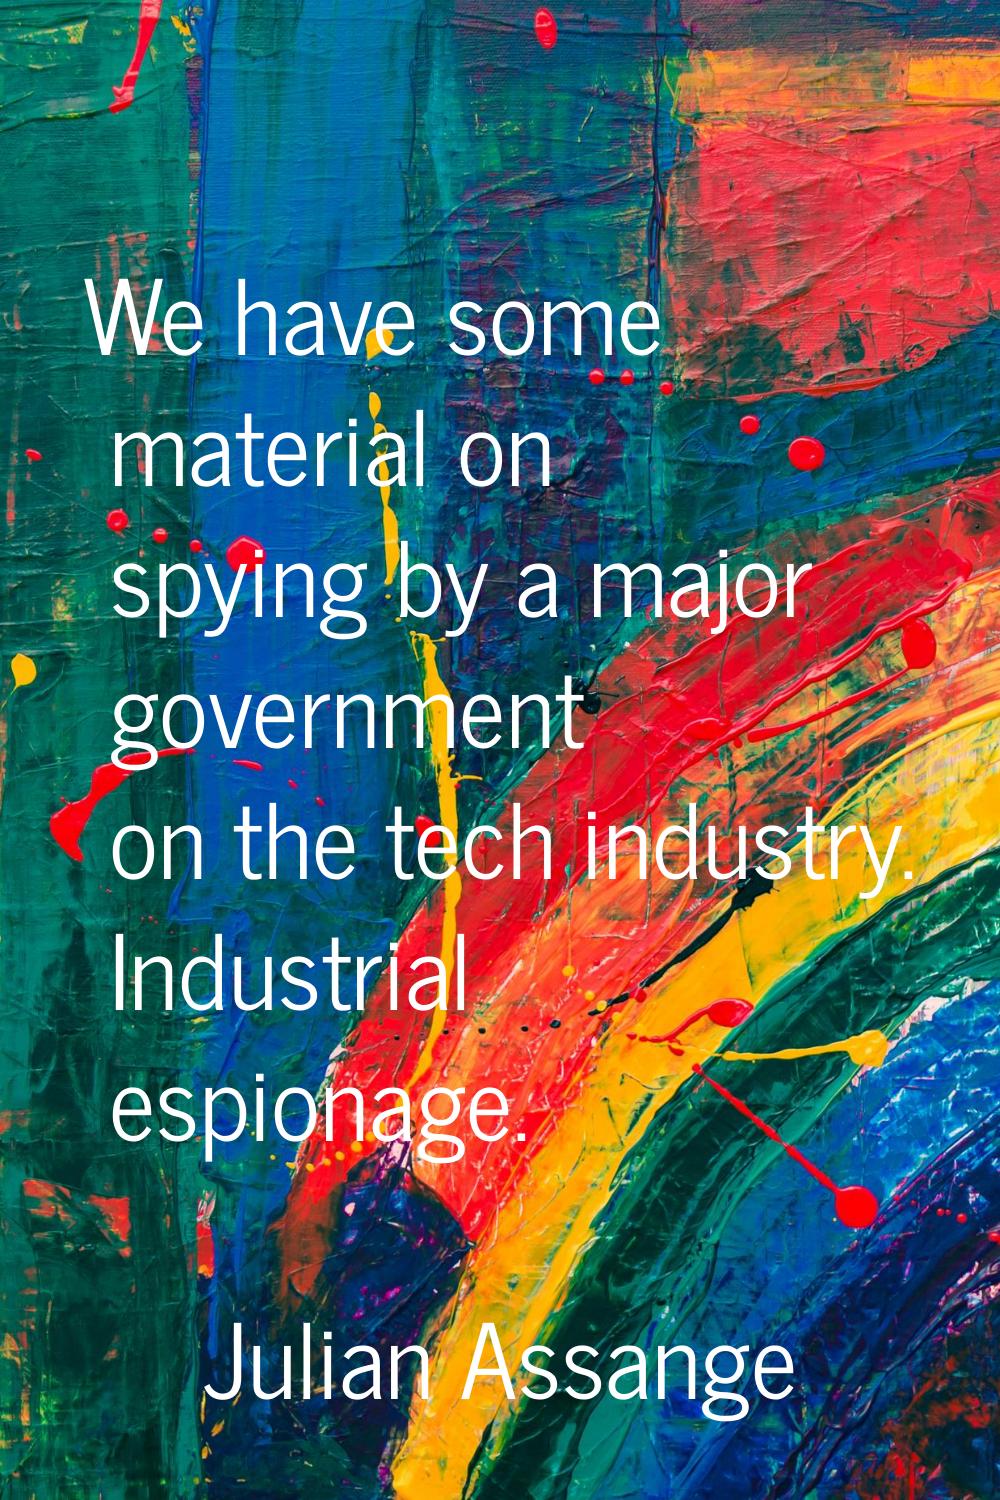 We have some material on spying by a major government on the tech industry. Industrial espionage.